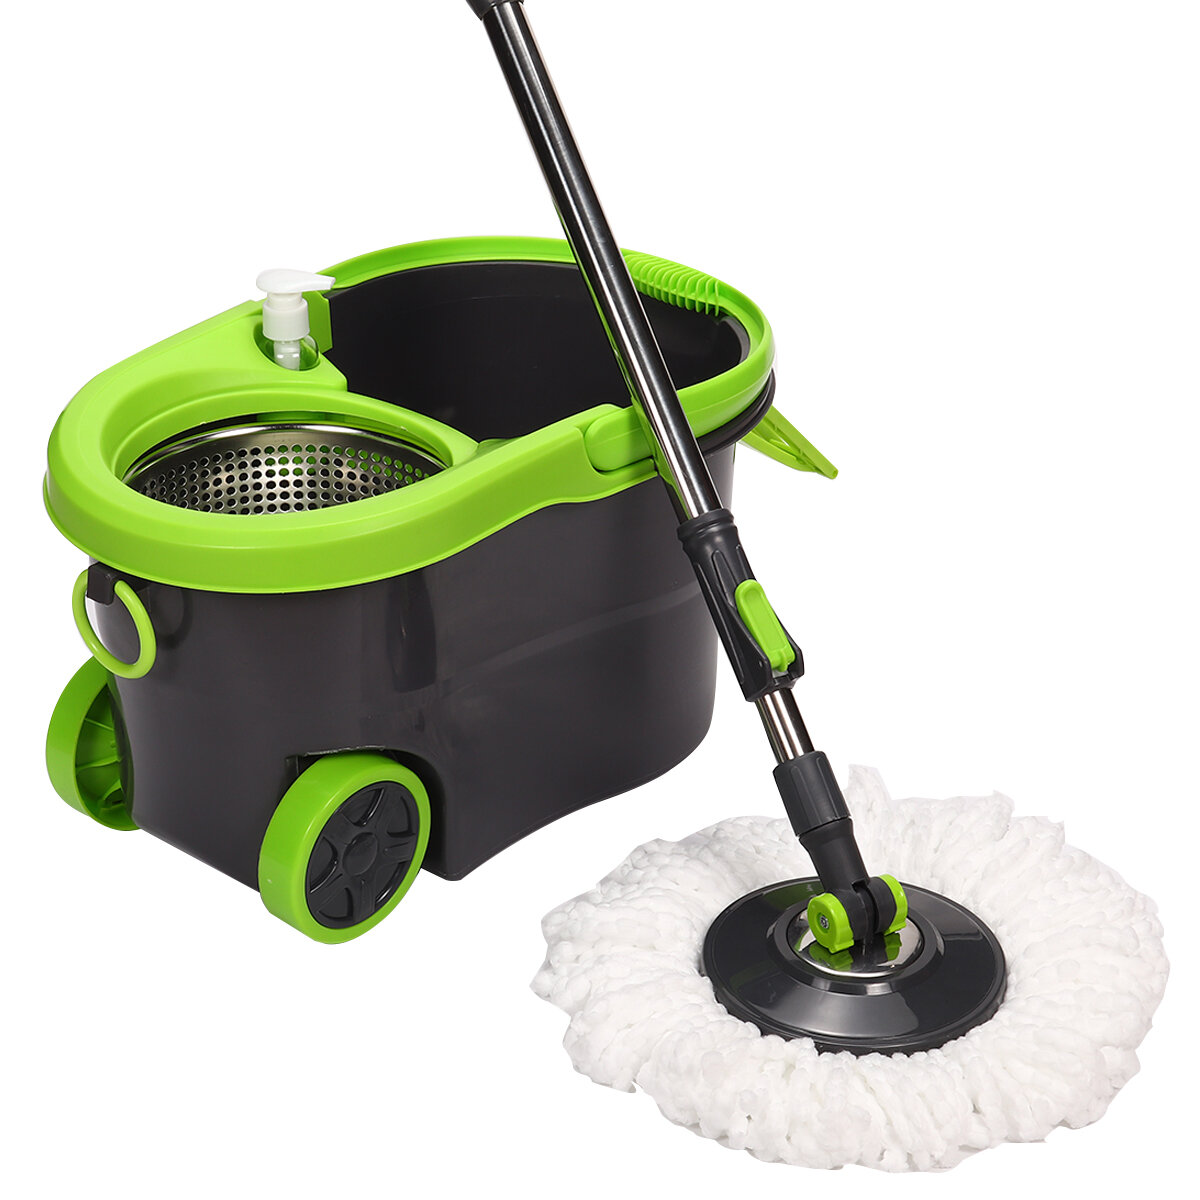 360° Rotating Spin Floor Mop Bucket Set 2 Microfiber Head Cleaning System Tool